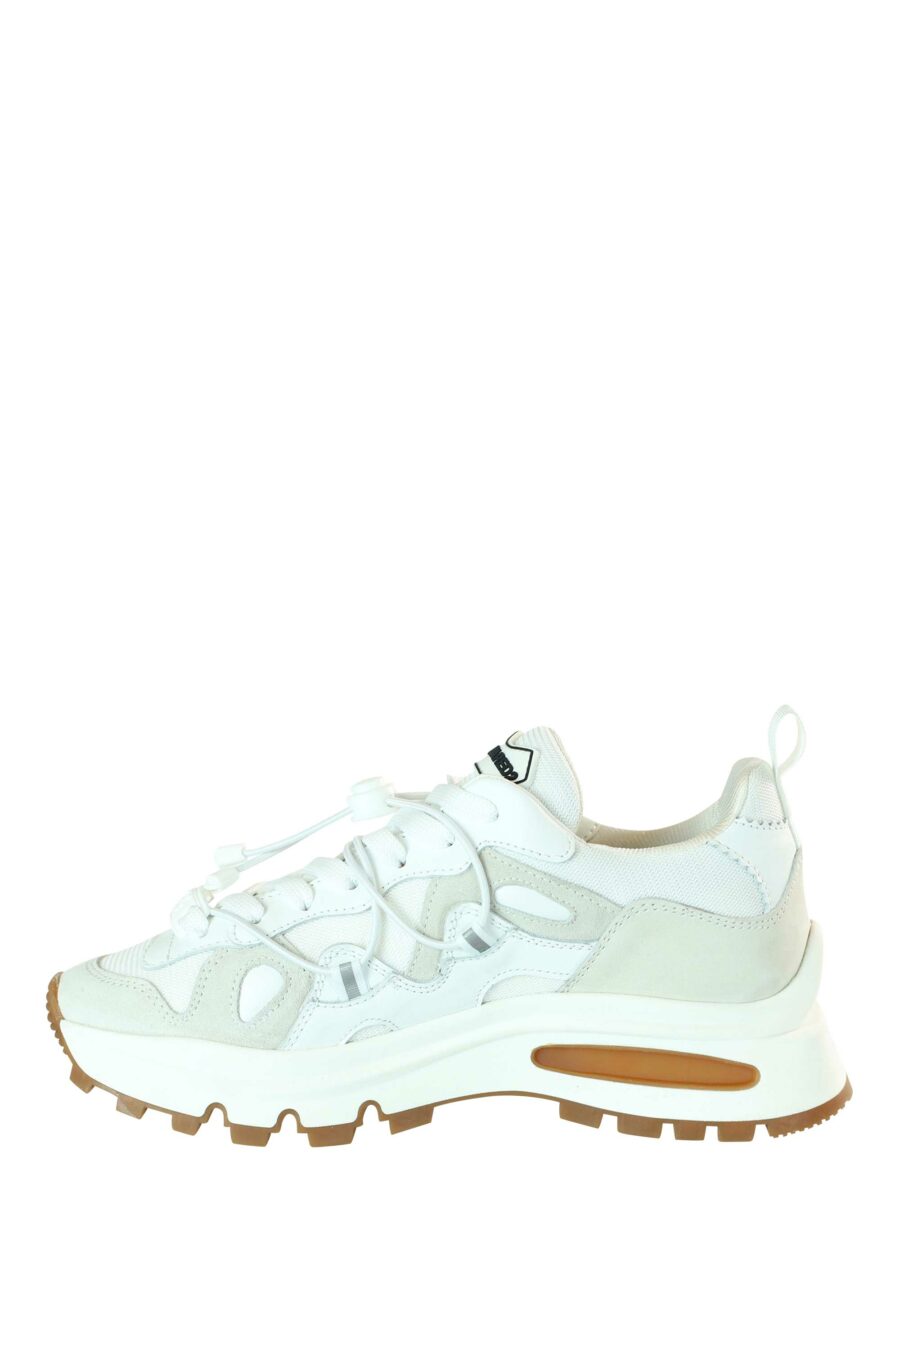 White mix trainers with white platform and brown sole - 8055777195864 3